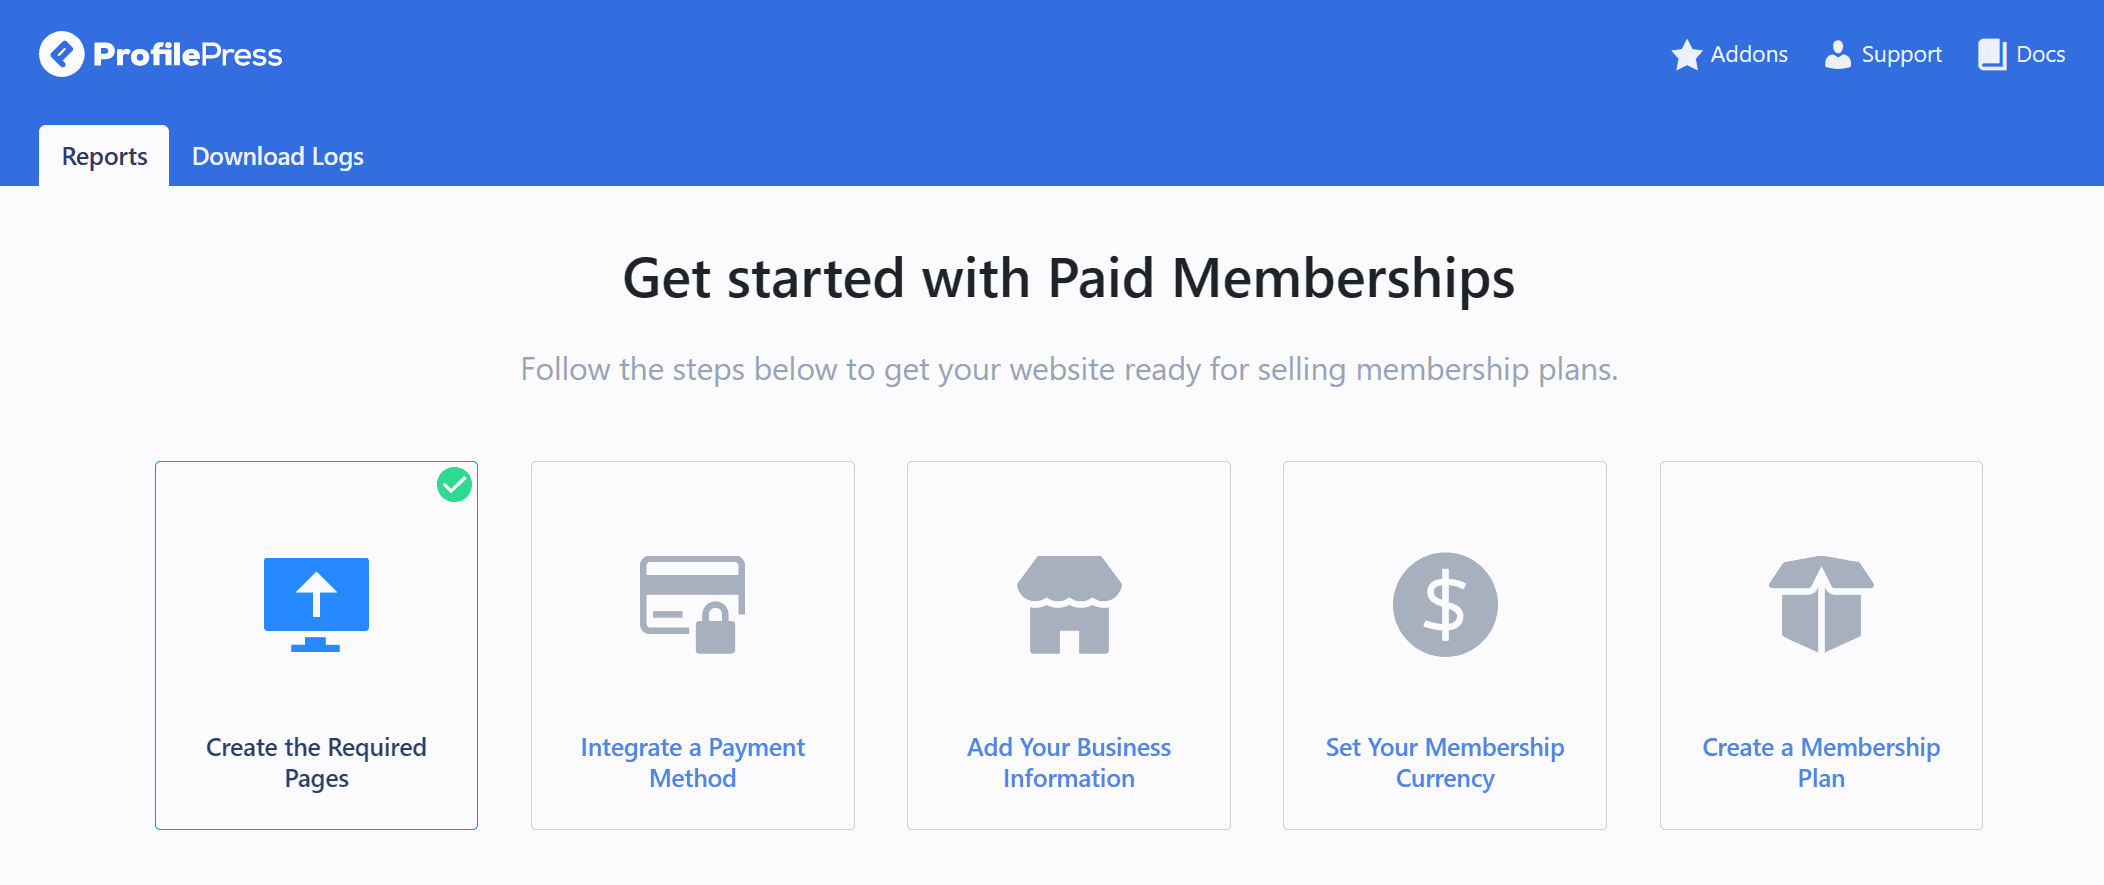 Get started steps to create a membership plan